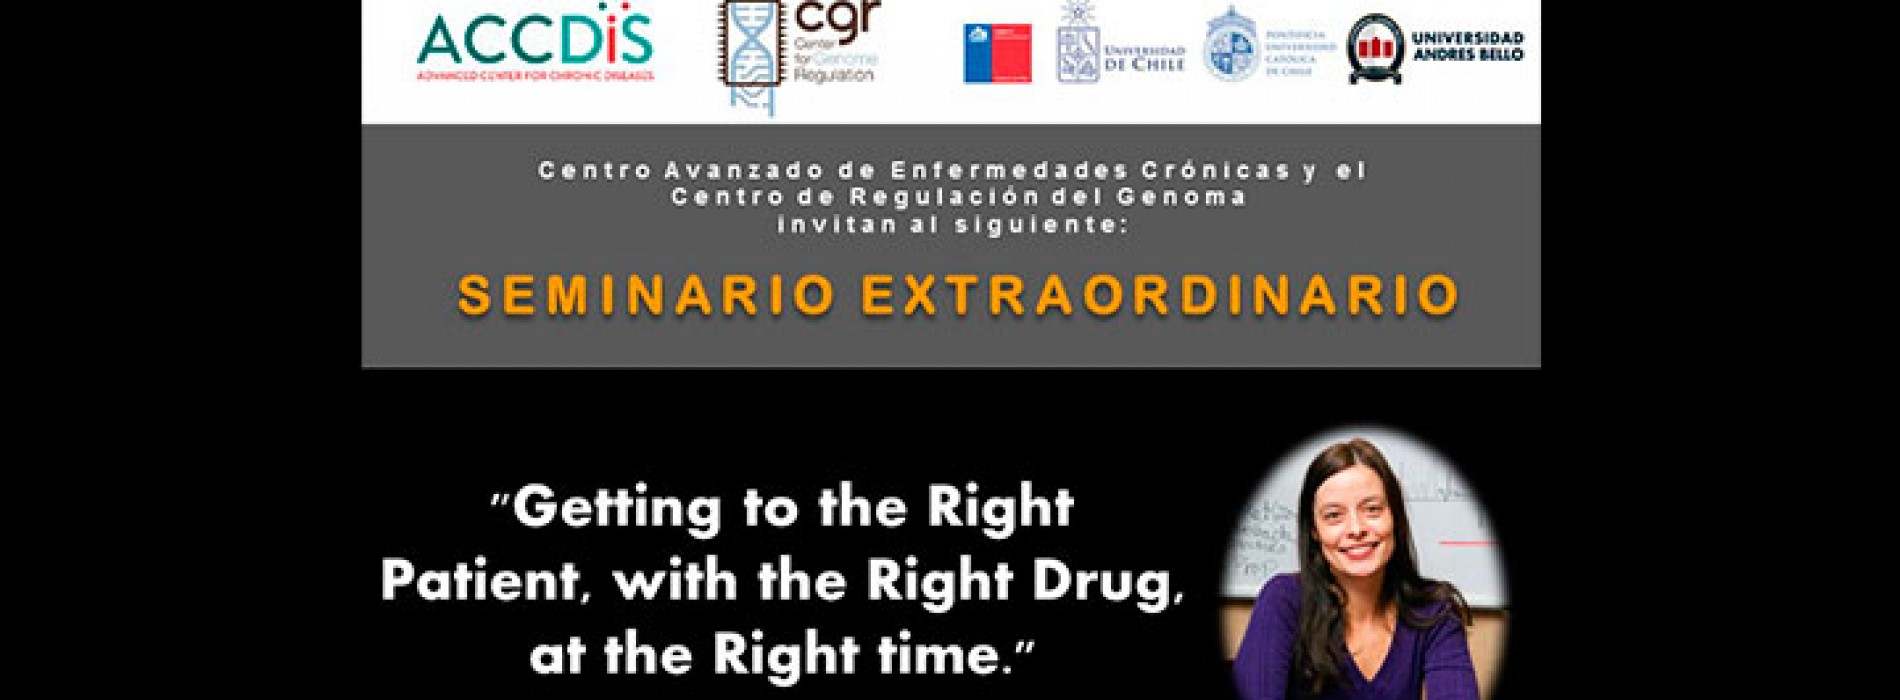 Seminario ACCDiS-CRG: «Getting to the Right Patient, with the Right Drug, at the Right time», Kenna R. Mills Shaw, Ph.D